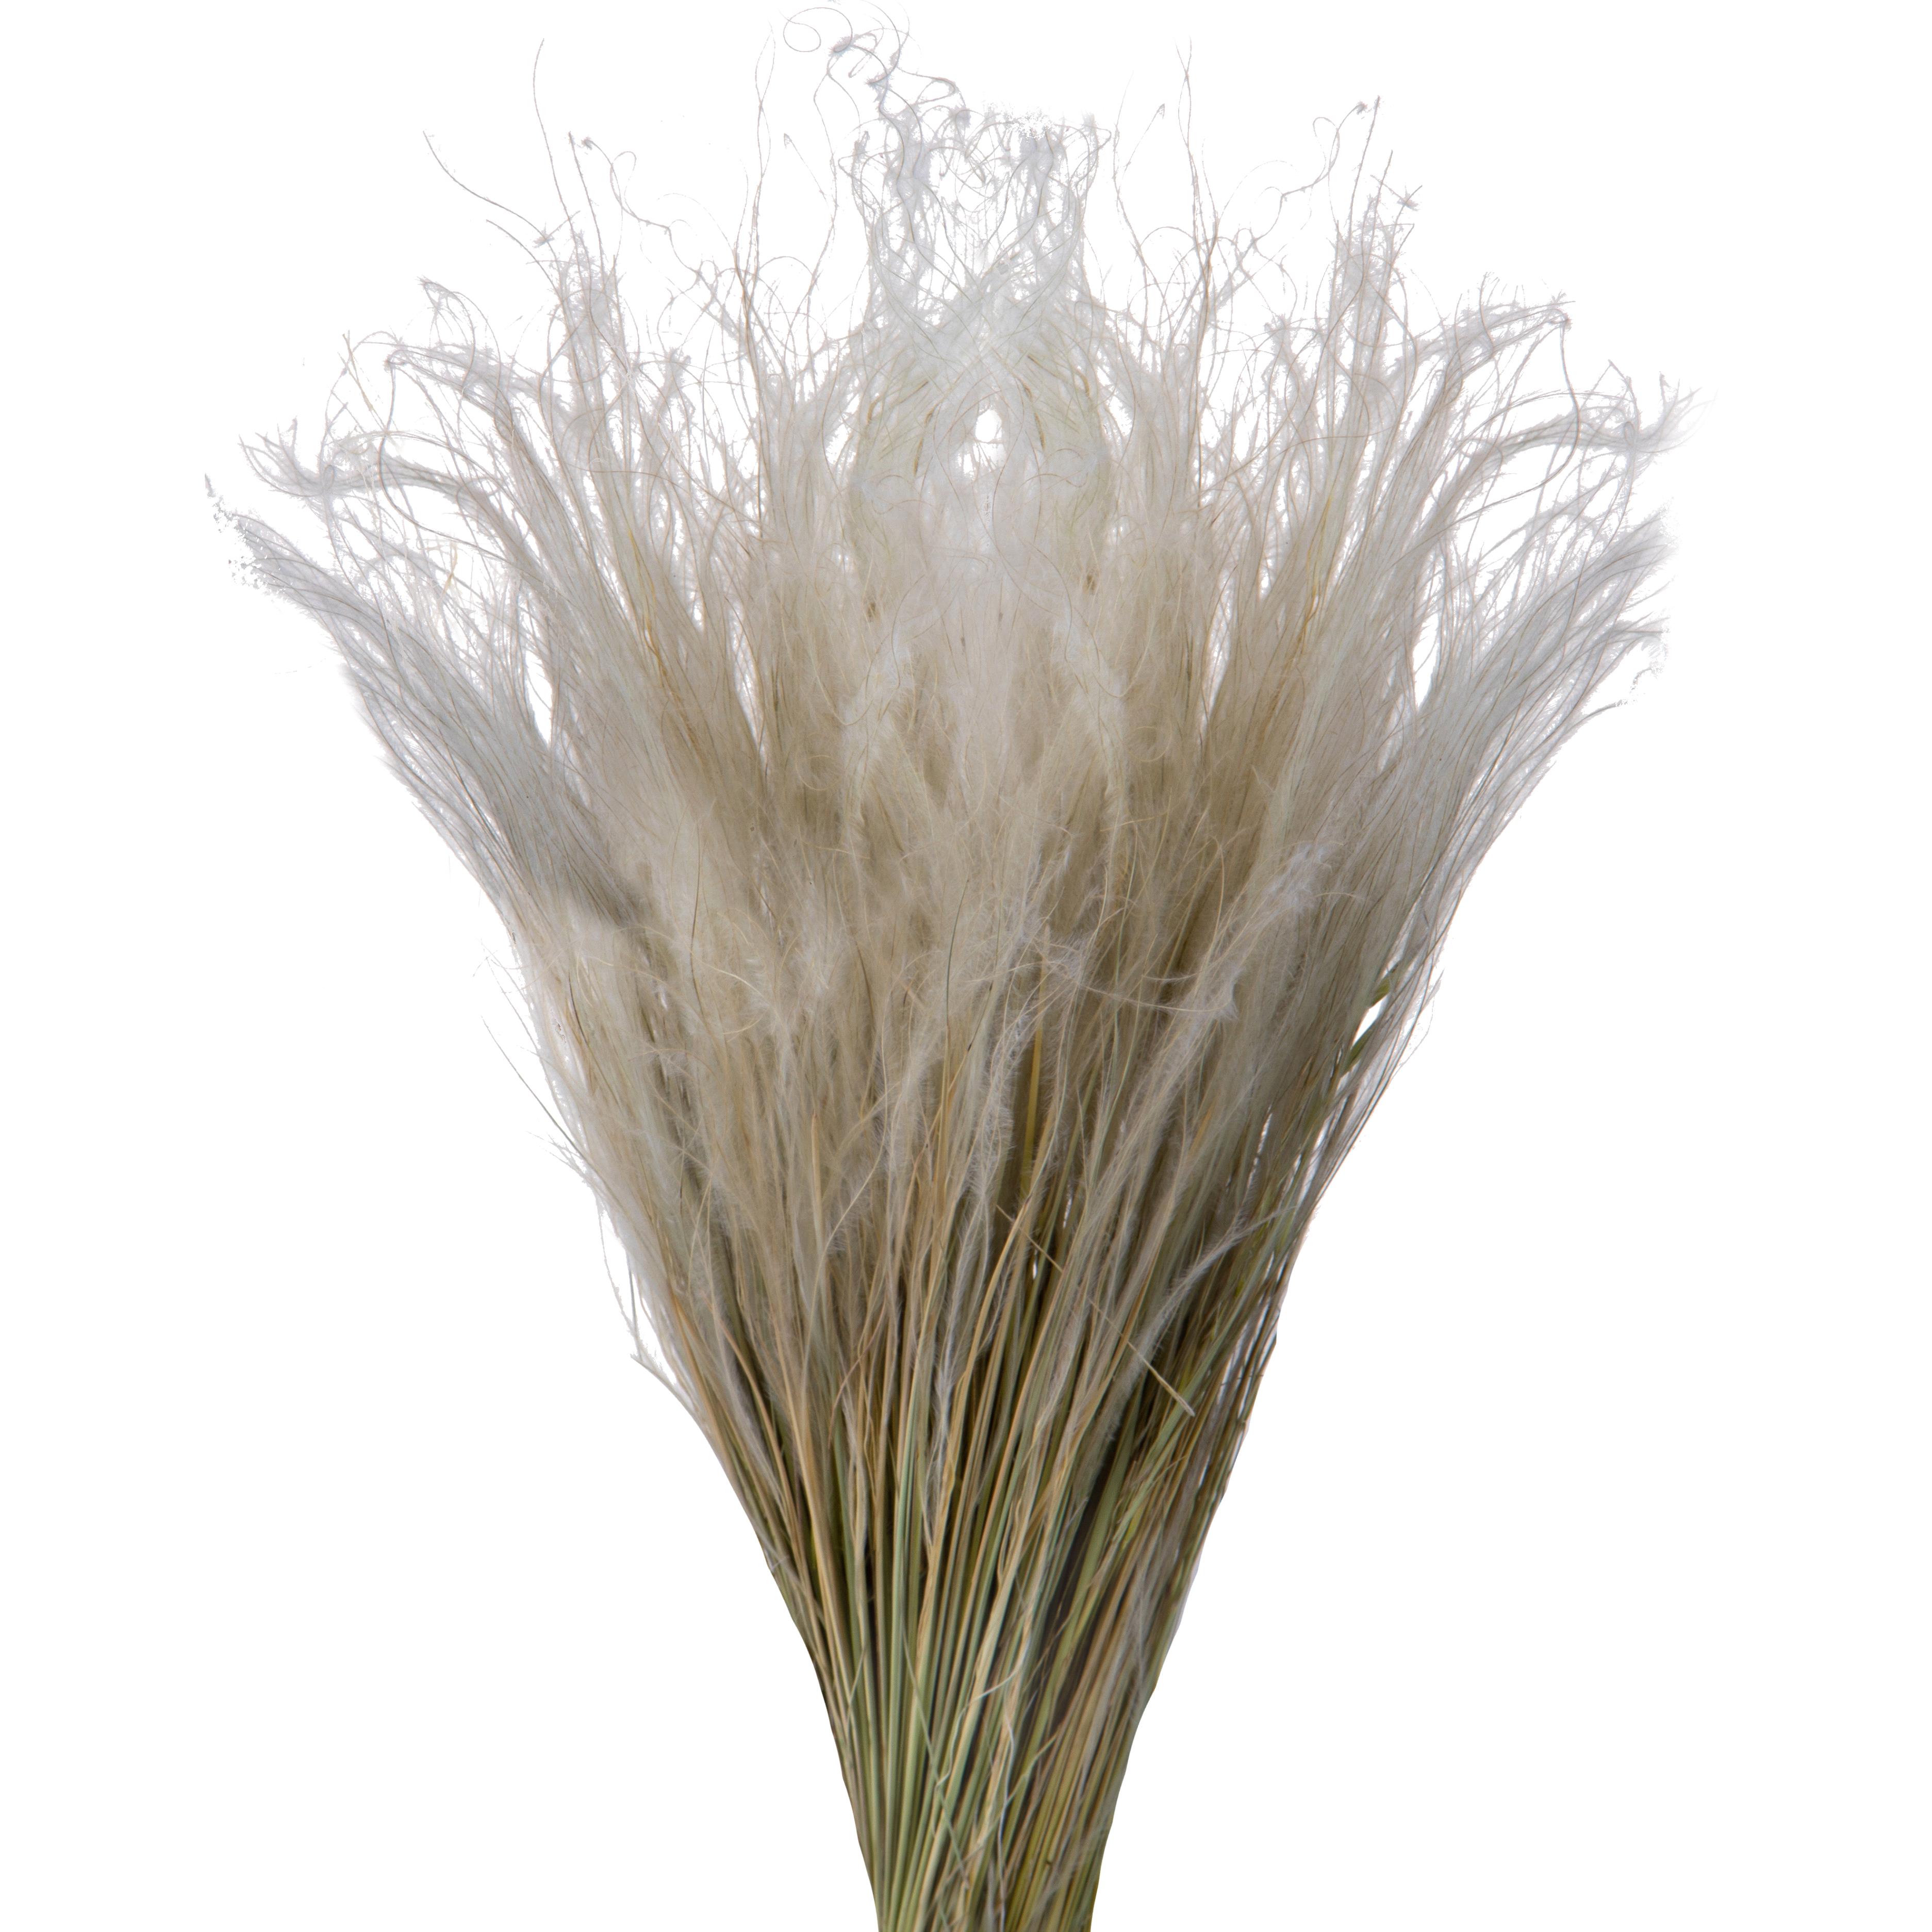 NATURAL PRODUCTS DRIED FLOWERS AND ERBS, FLOWERS, FRUITS AND NATURAL PROTEES, STIPA PENNATA NAT. MAZZO